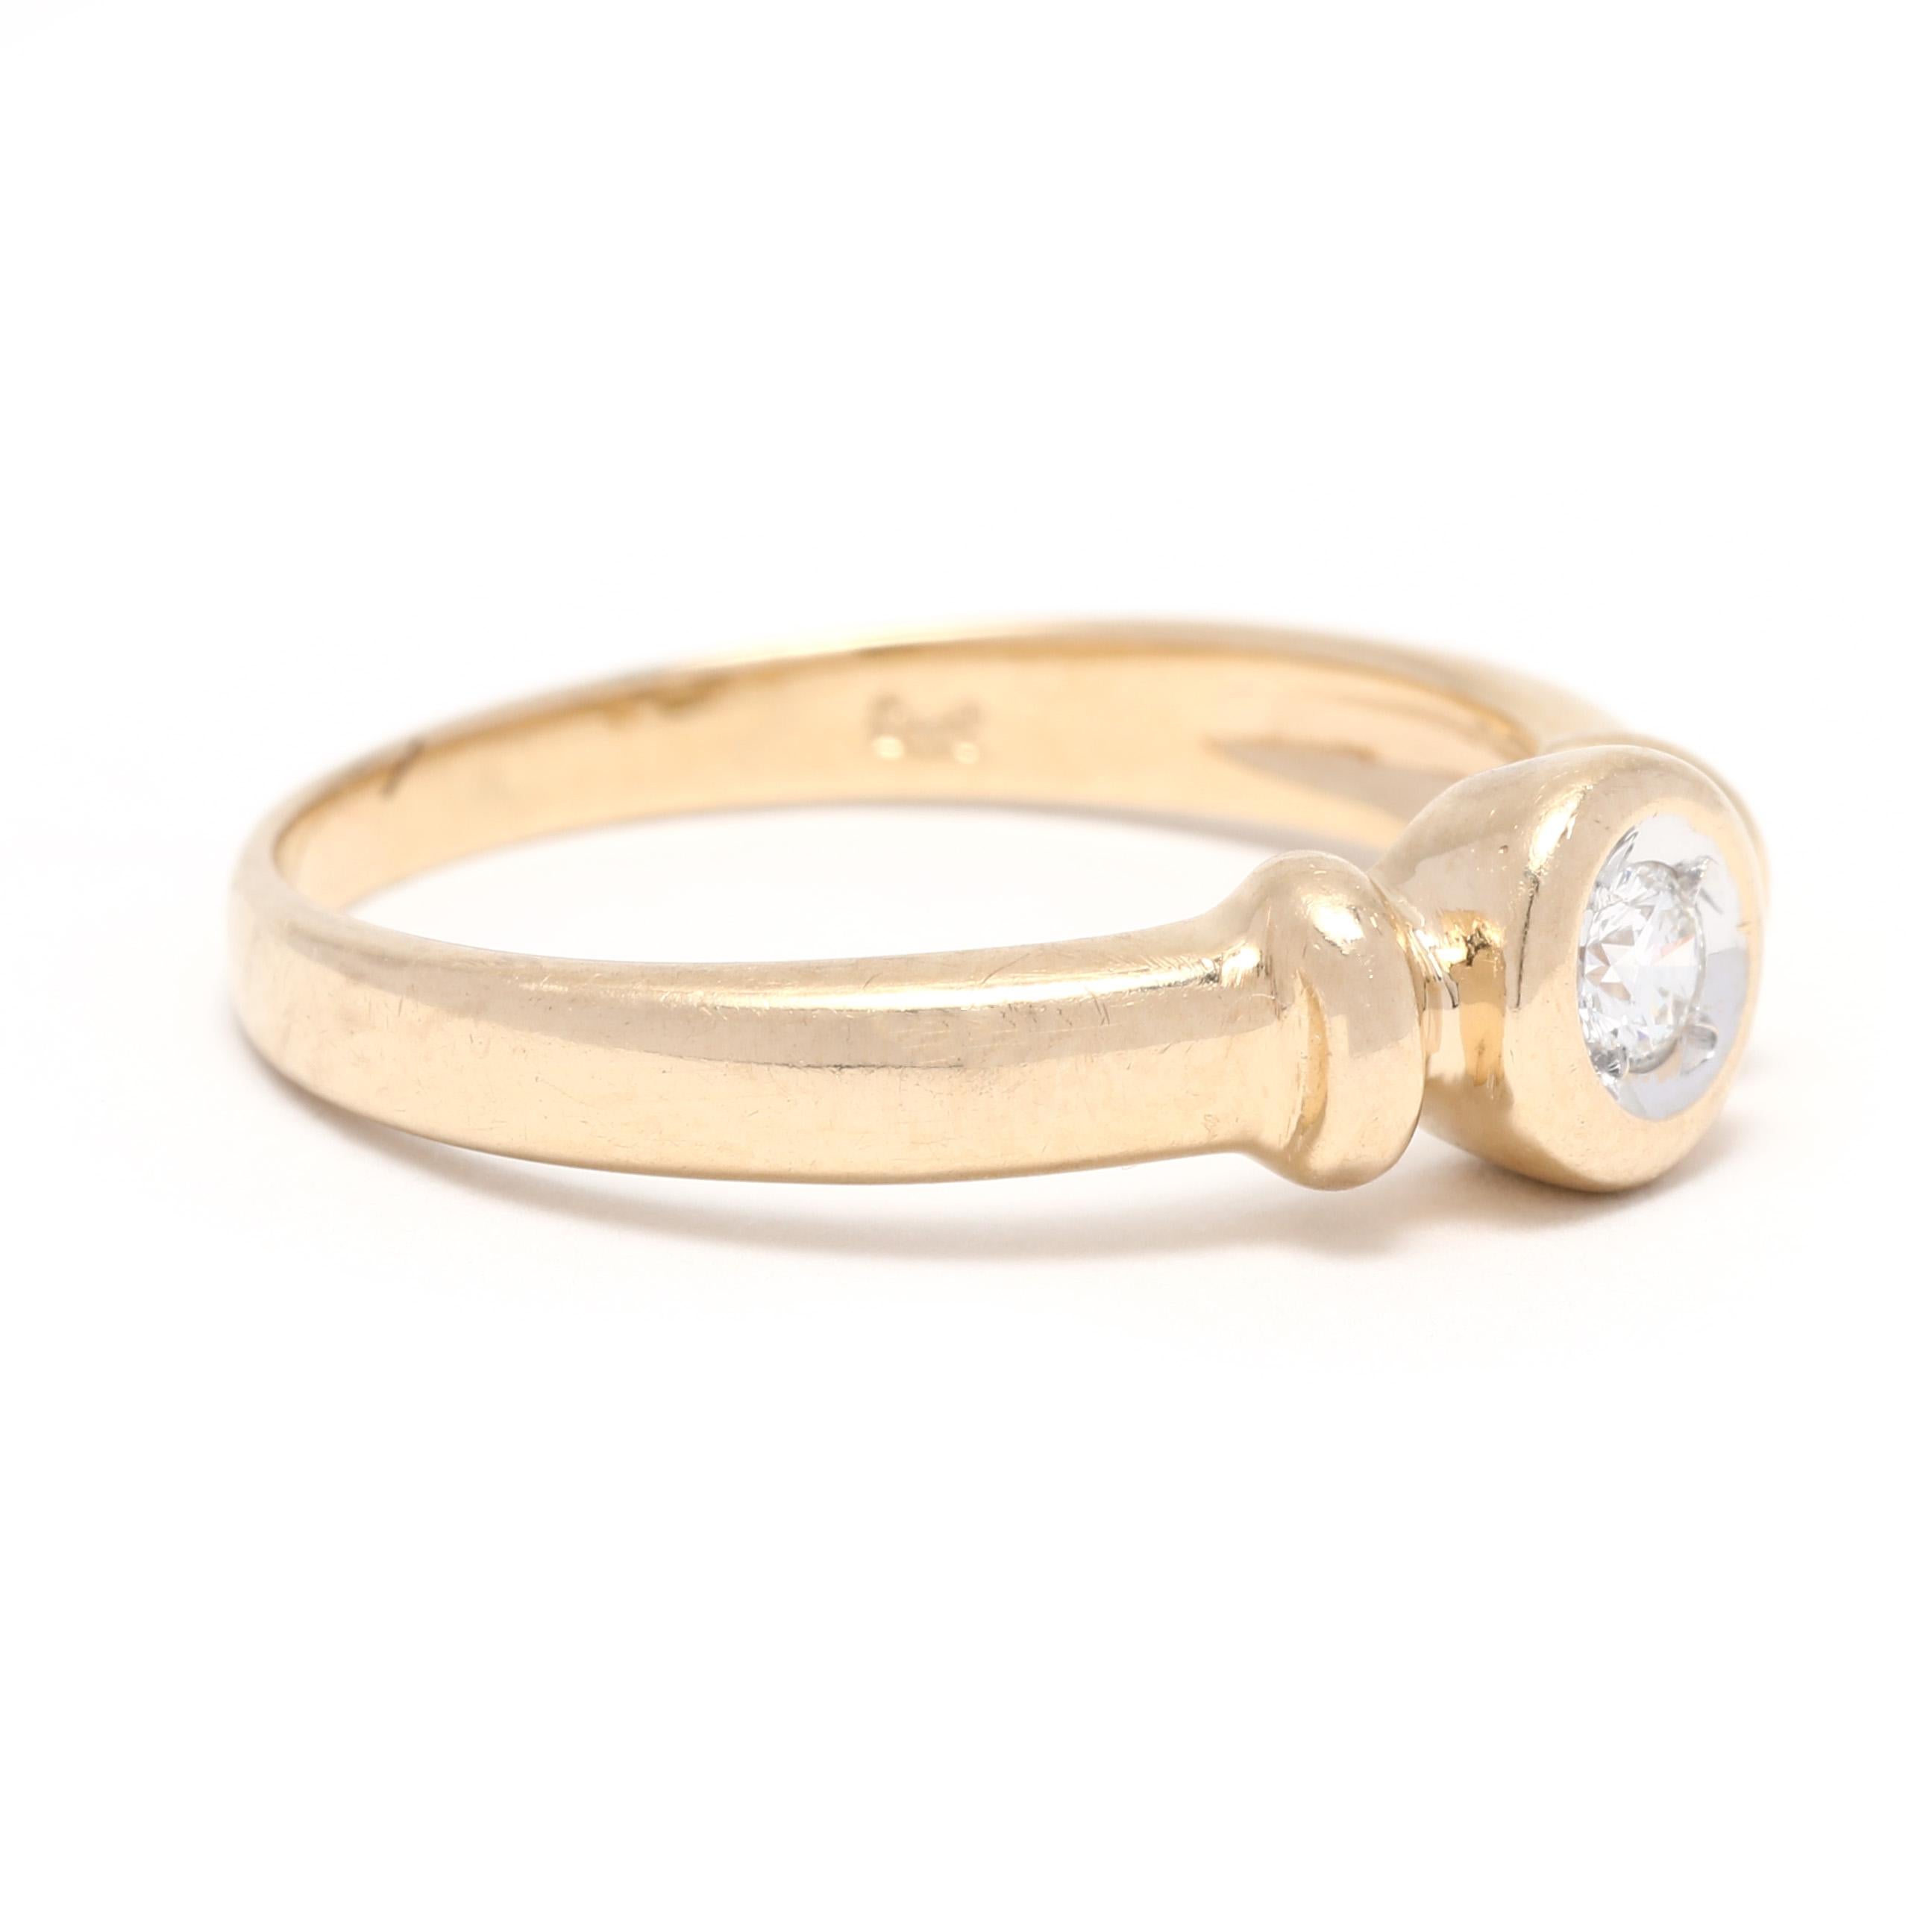 This beautiful 0.10ctw diamond solitaire engagement ring is crafted in 14K yellow gold and is sized for a 7.5 ring finger. This classic diamond solitaire ring is a timeless symbol of your love and commitment, and its simple and elegant design